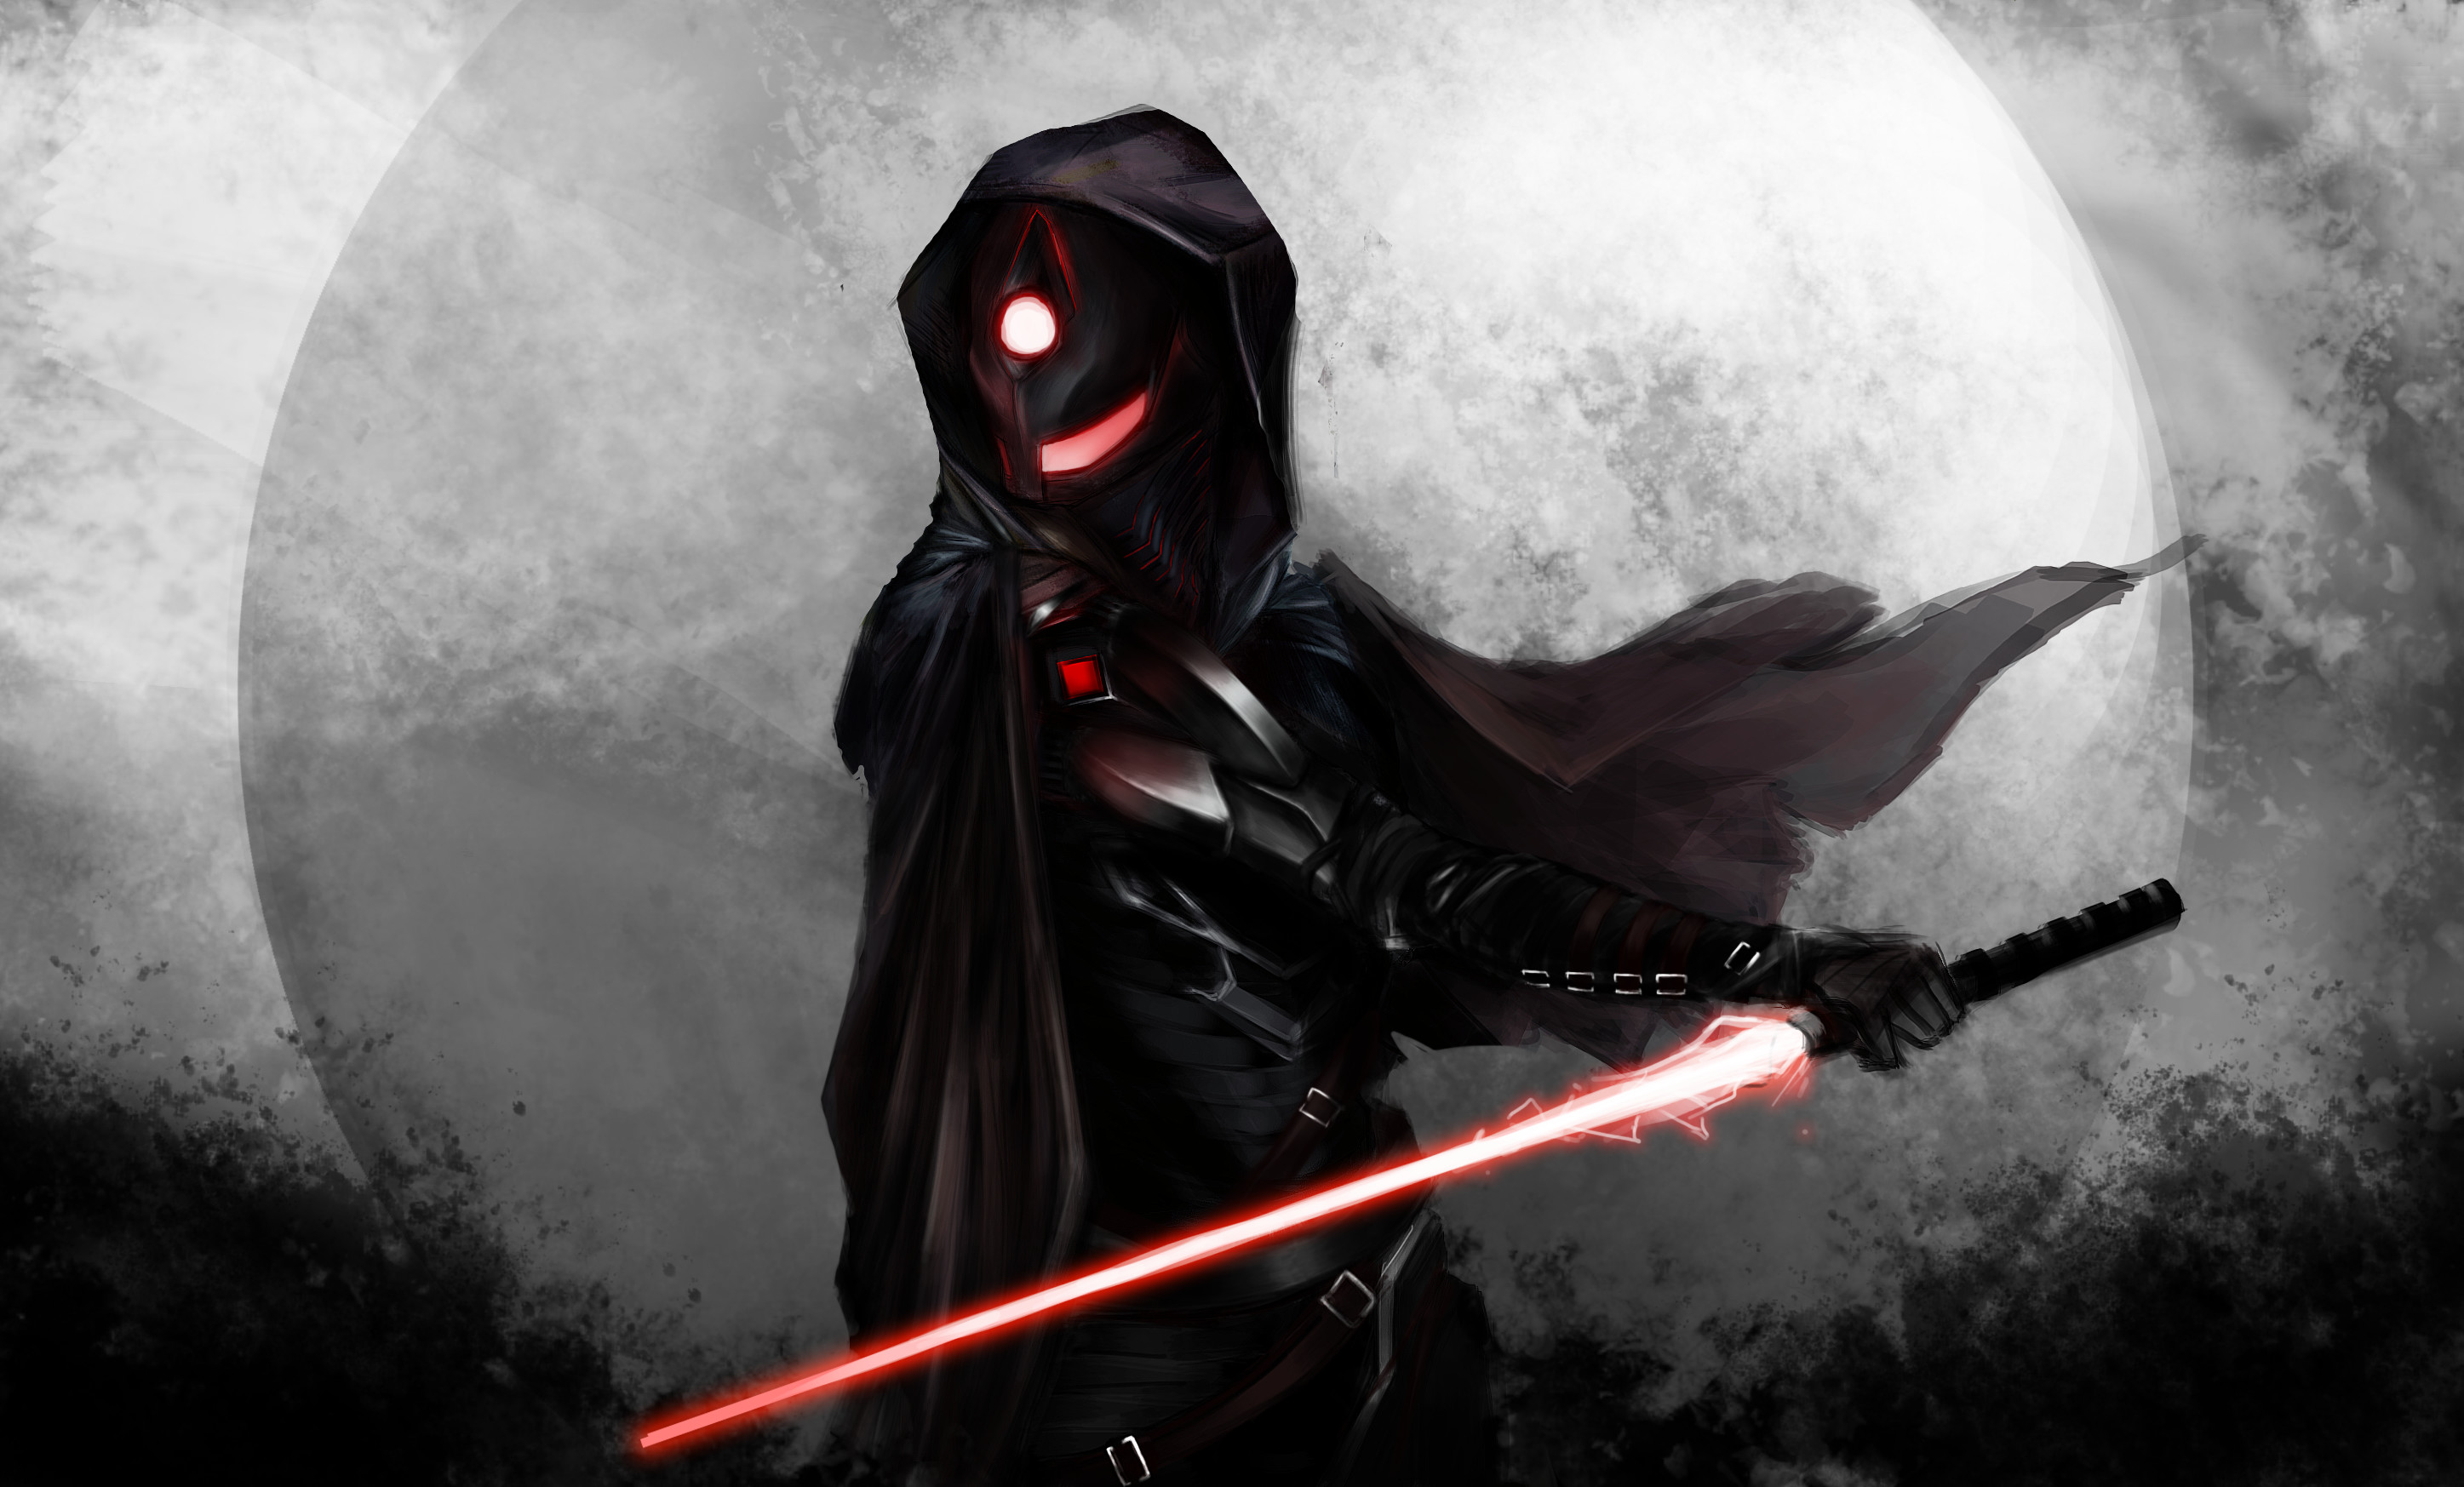 Star Wars Sith Empire Wallpaper Pictures to Pin on Pinterest .